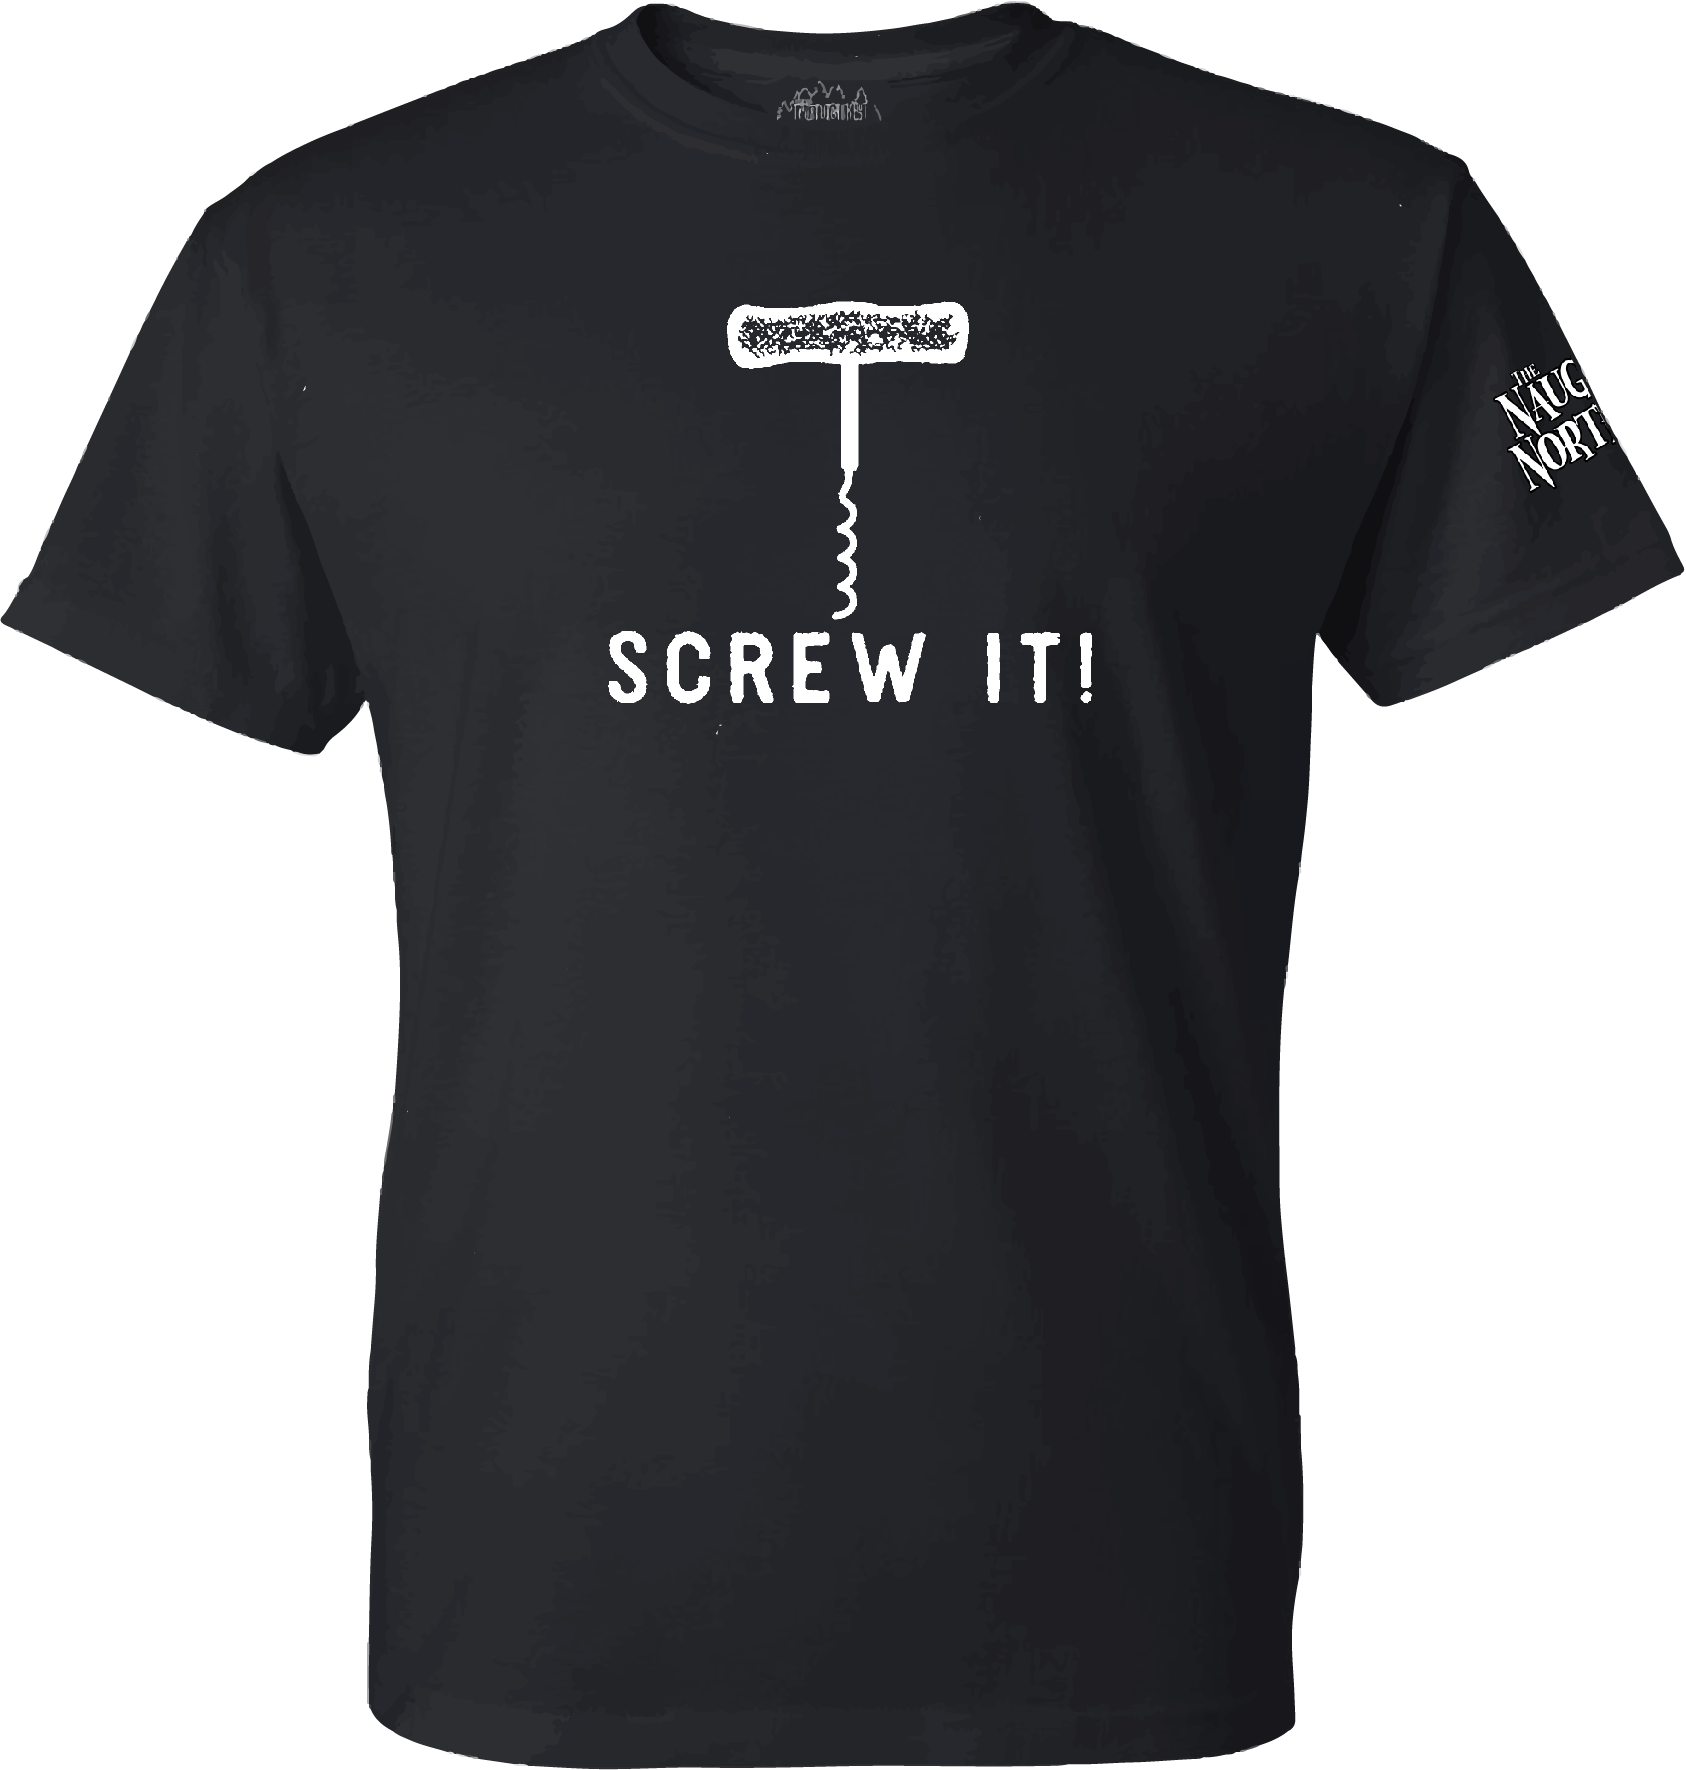 T-Shirt : Screw It! & May Contain Alcohol - Black